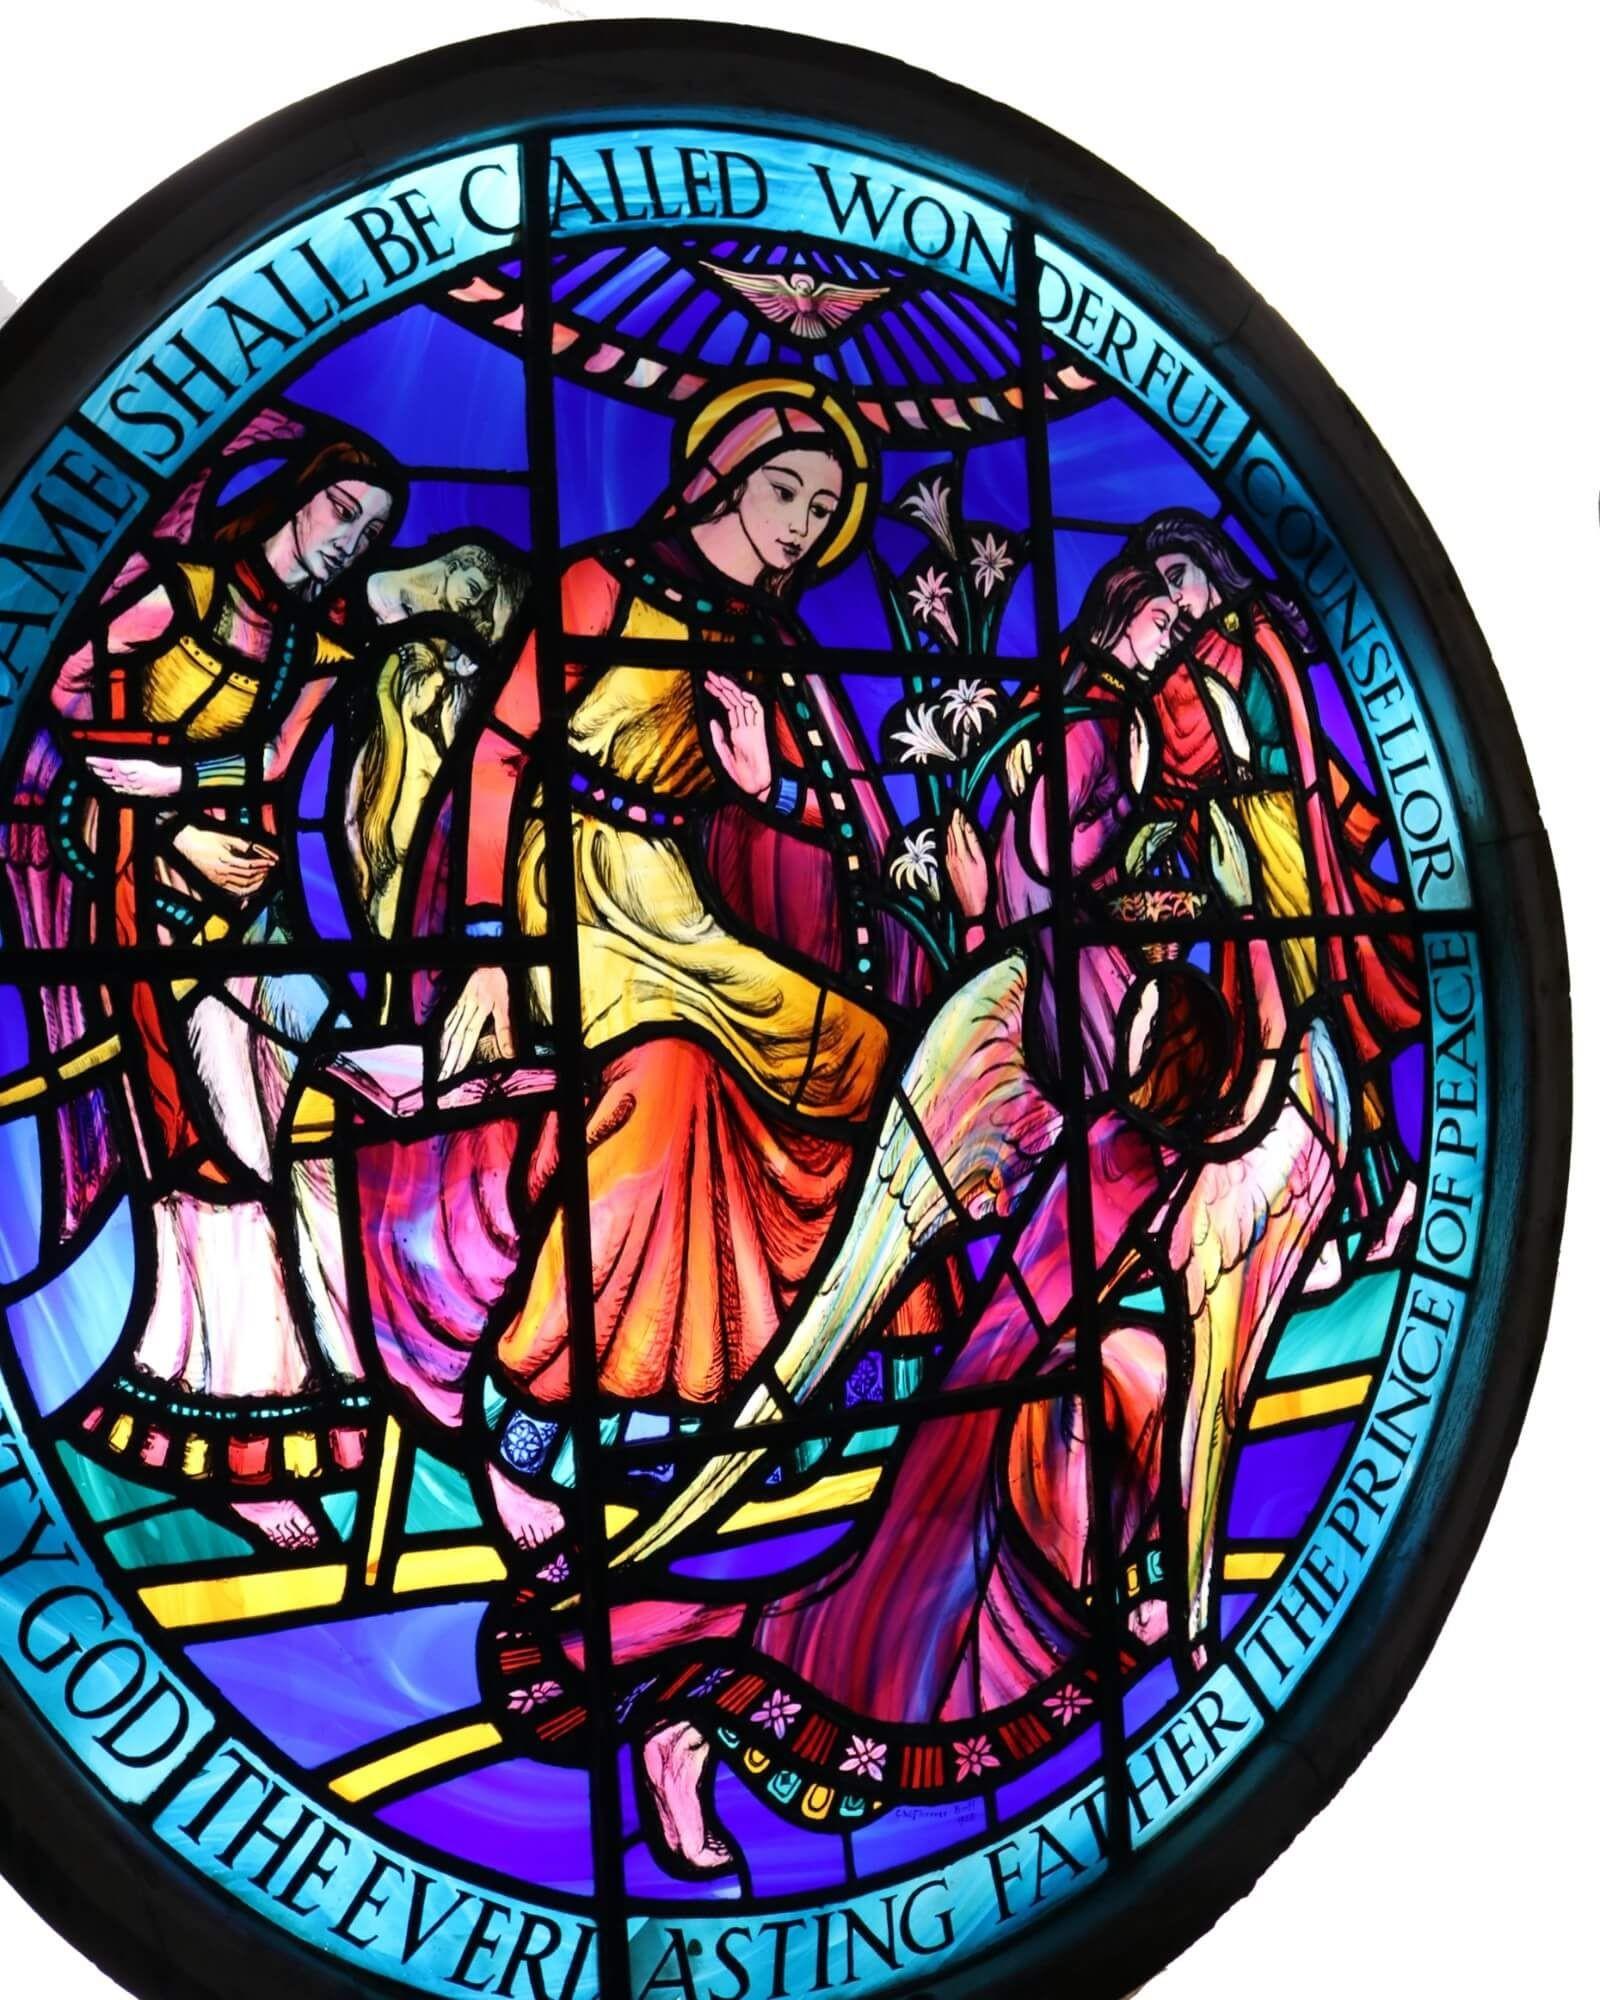 This beautiful round stained glass window once decorated the former parish church in Glenlivet, Scotland. Dating from the mid 20th century, it is signed and dated by the artist C W Florence, a talented stained glass artist and former Principal